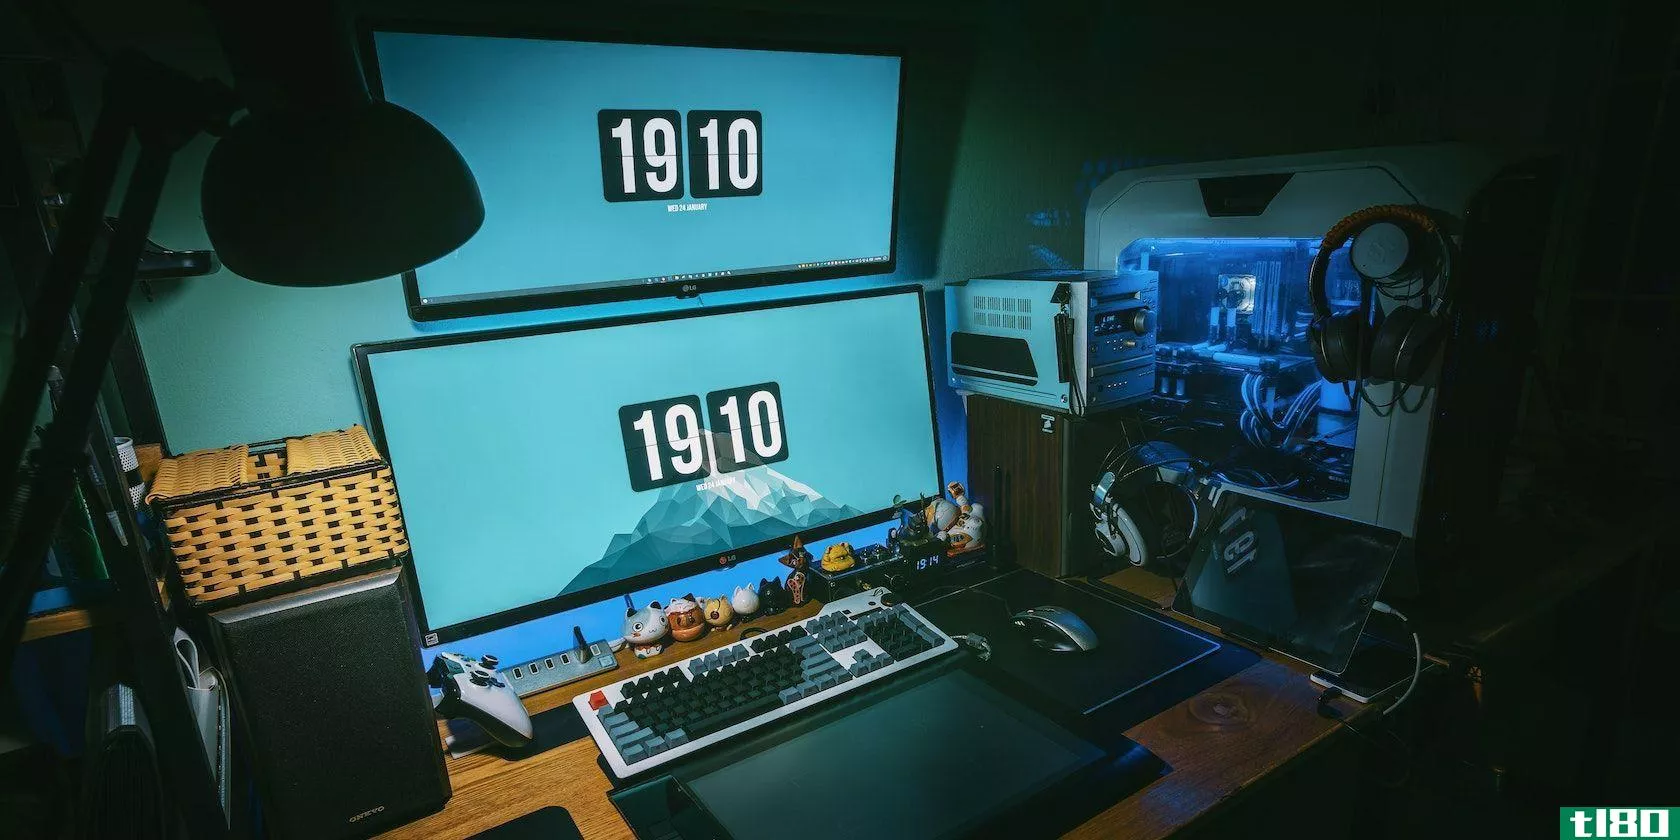 A gaming rig with two monitors displaying the time 